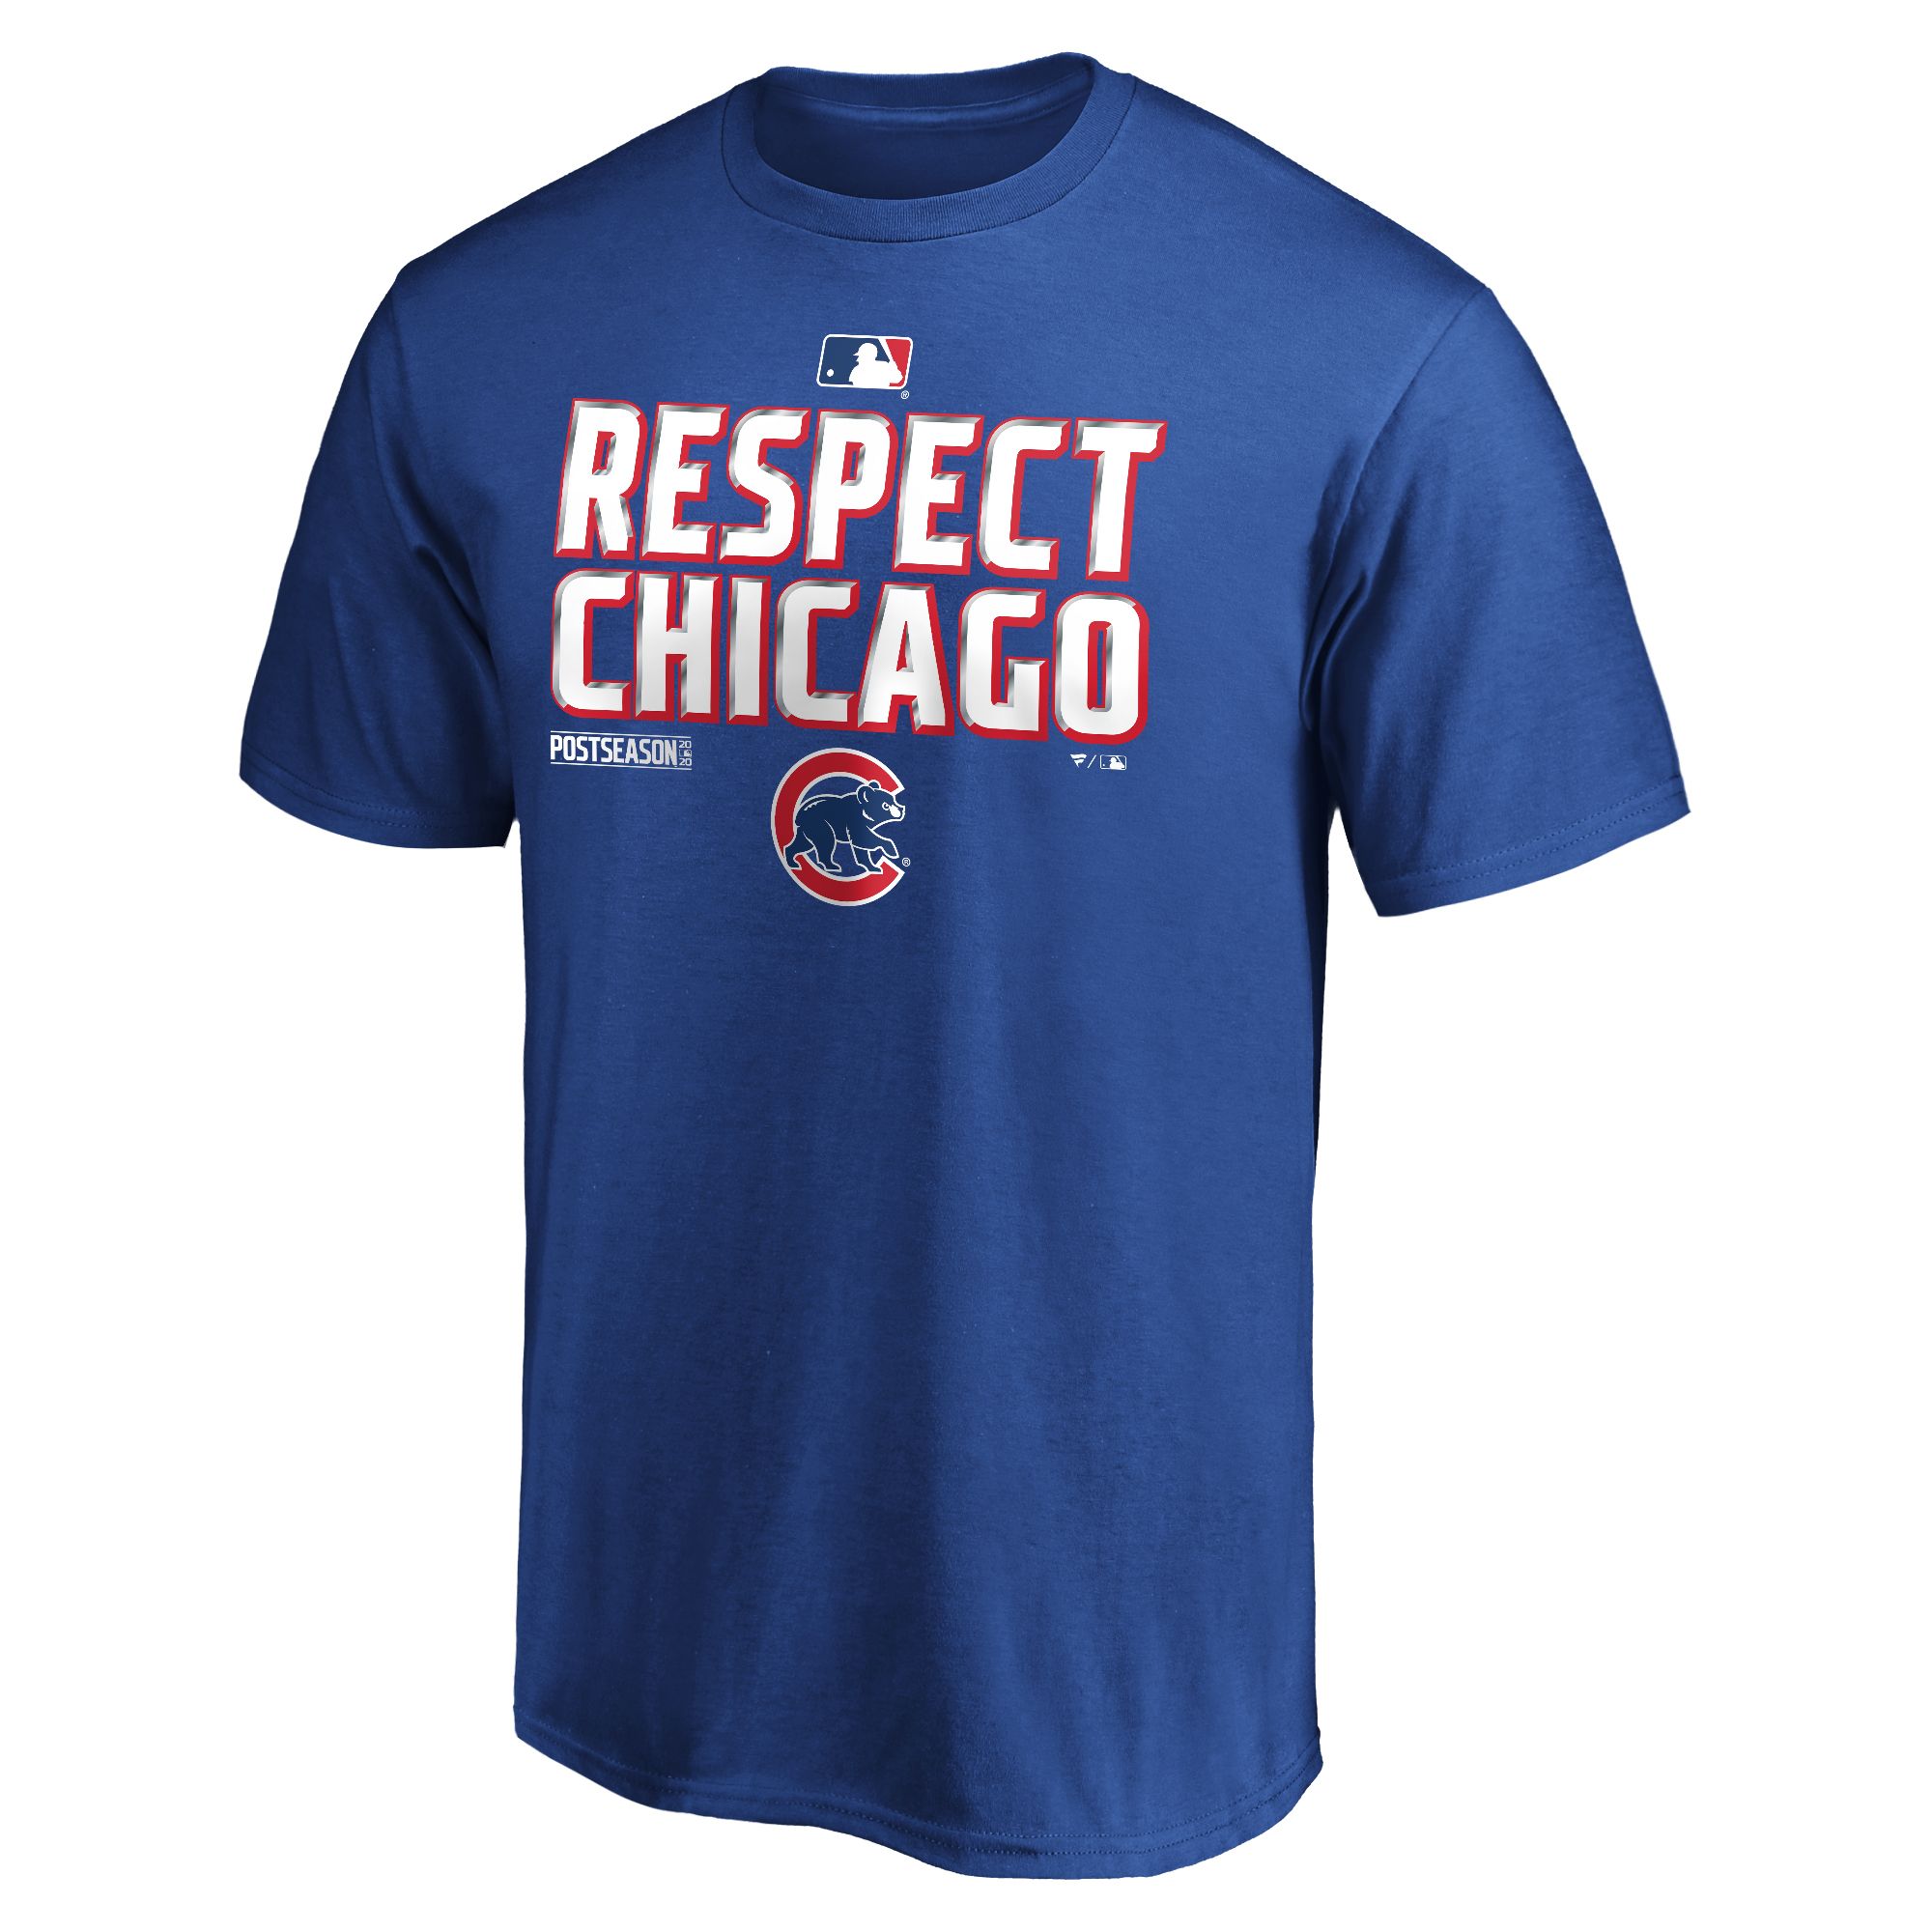 chicago cubs championship tee shirts